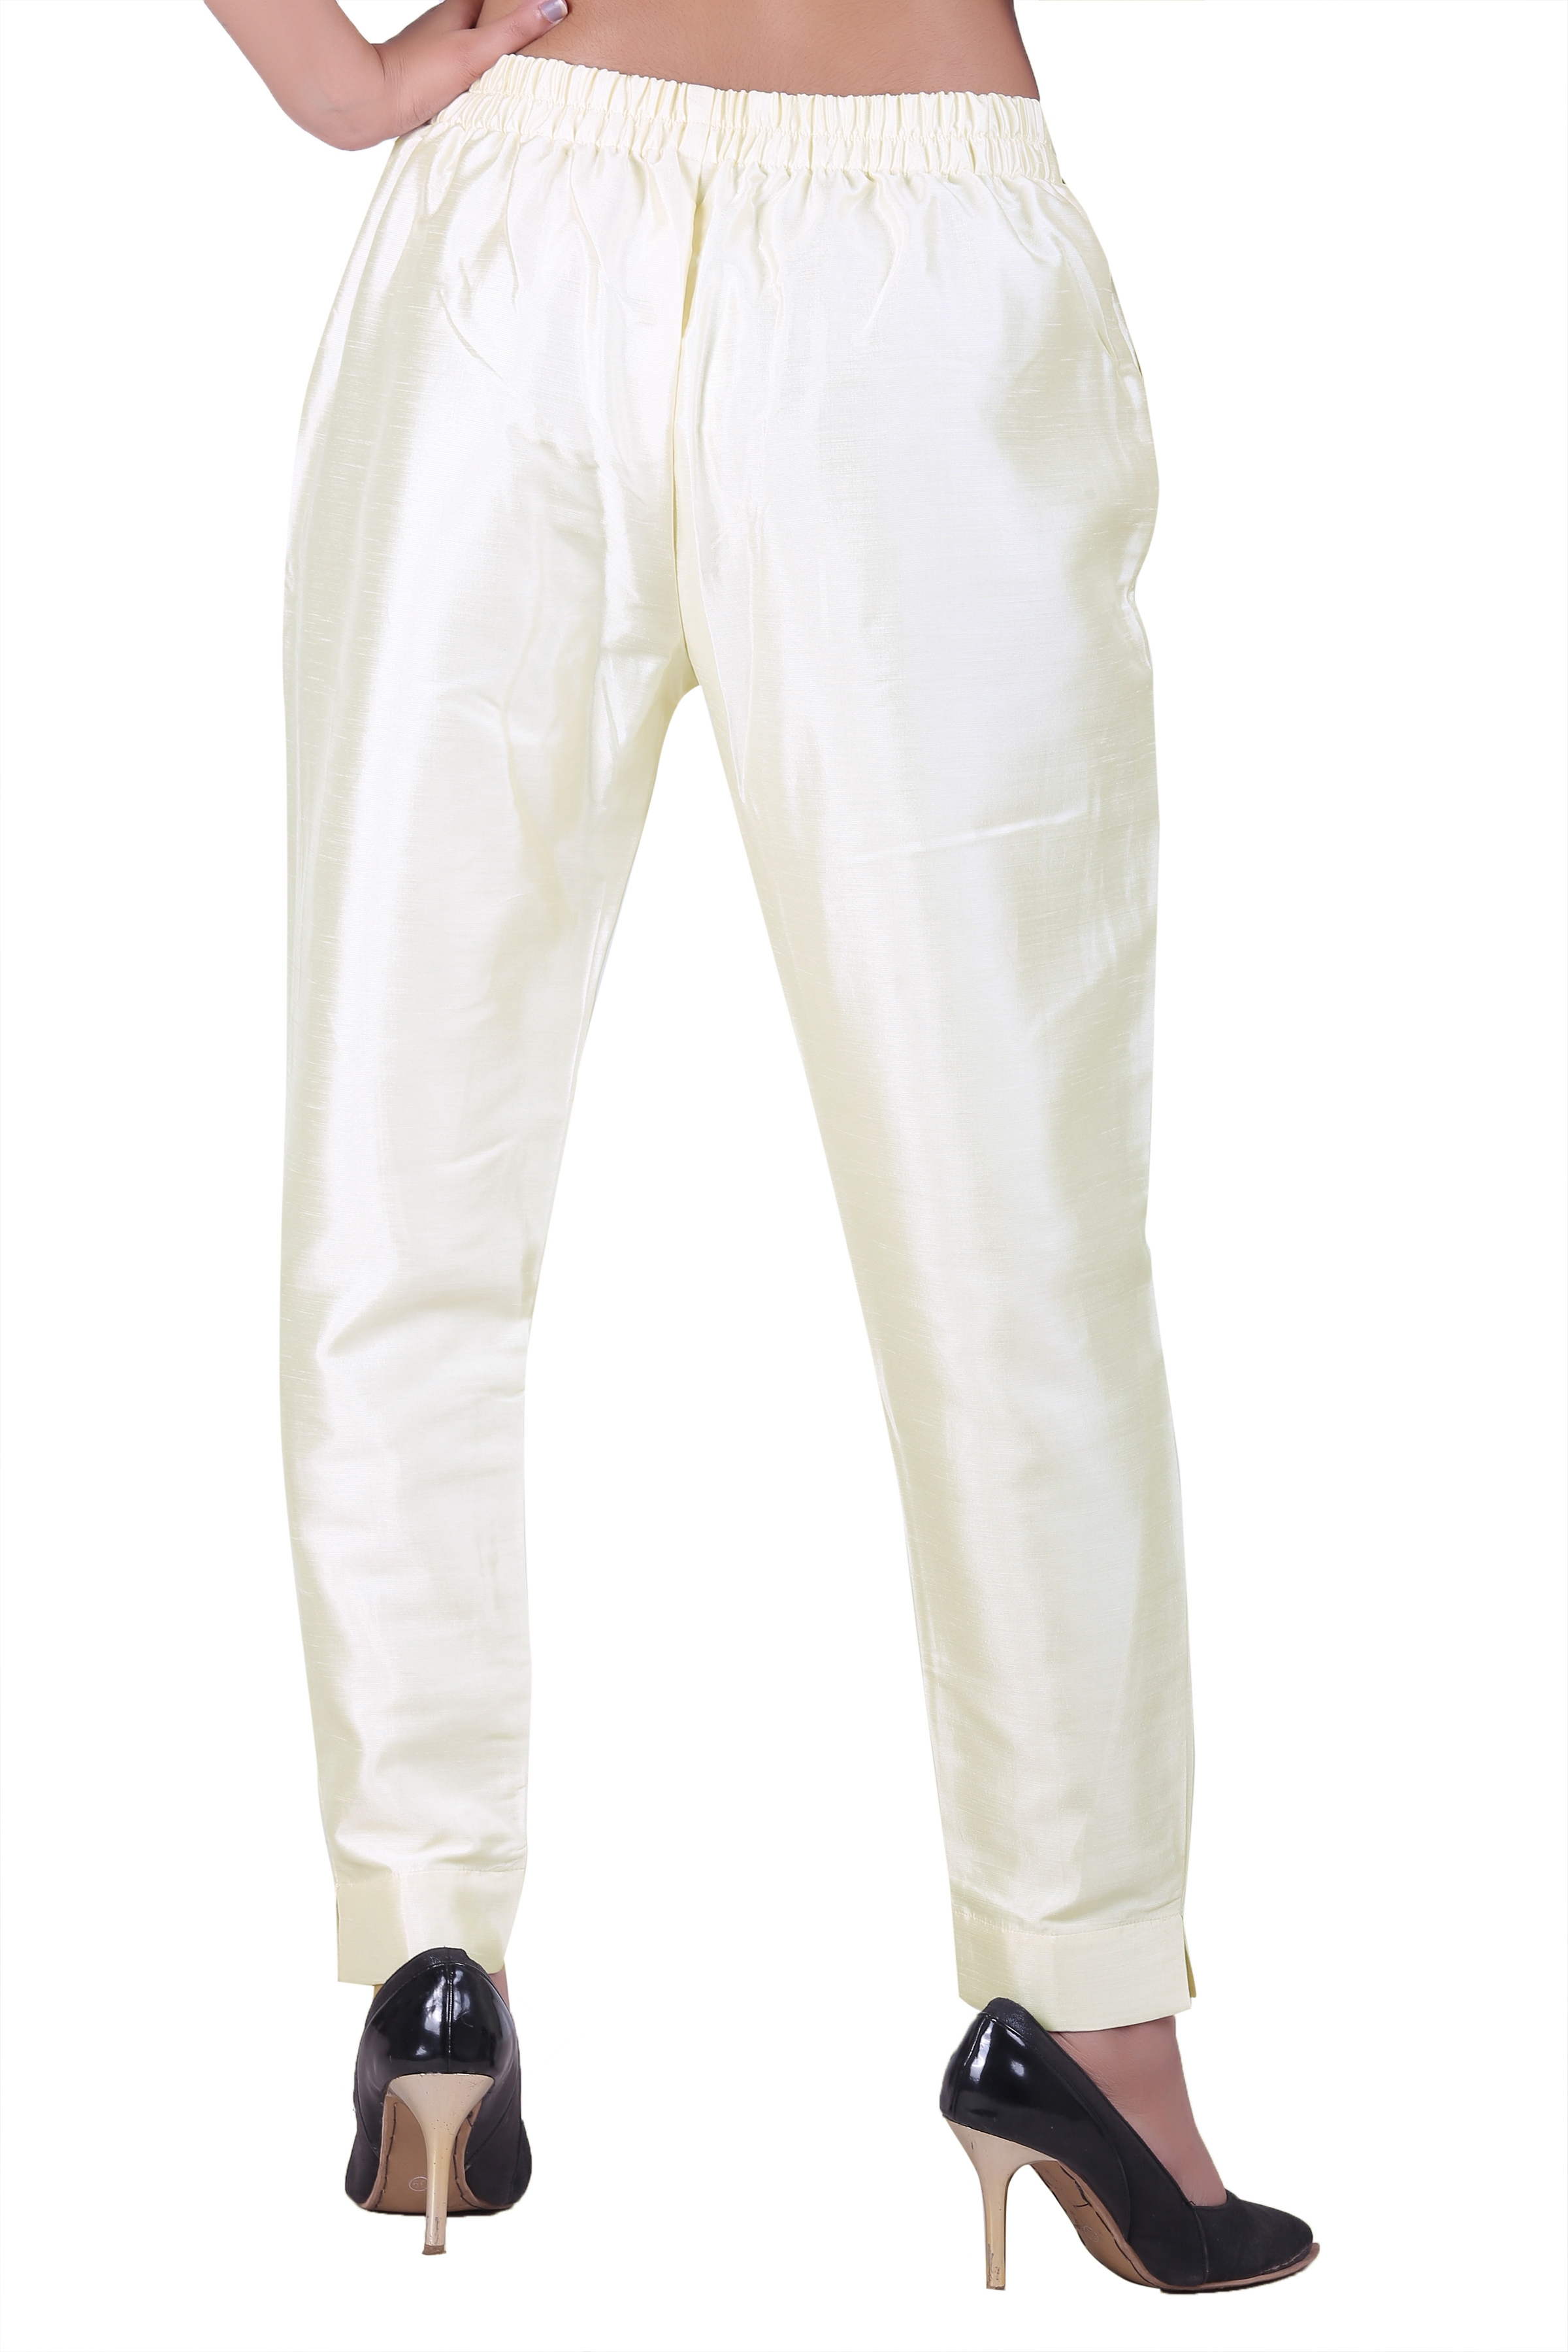 Buy NumBrave White, Golden & Silver Raw Silk Pants with Full Length Cotton  Lining for Women (Pack of 3) at Amazon.in